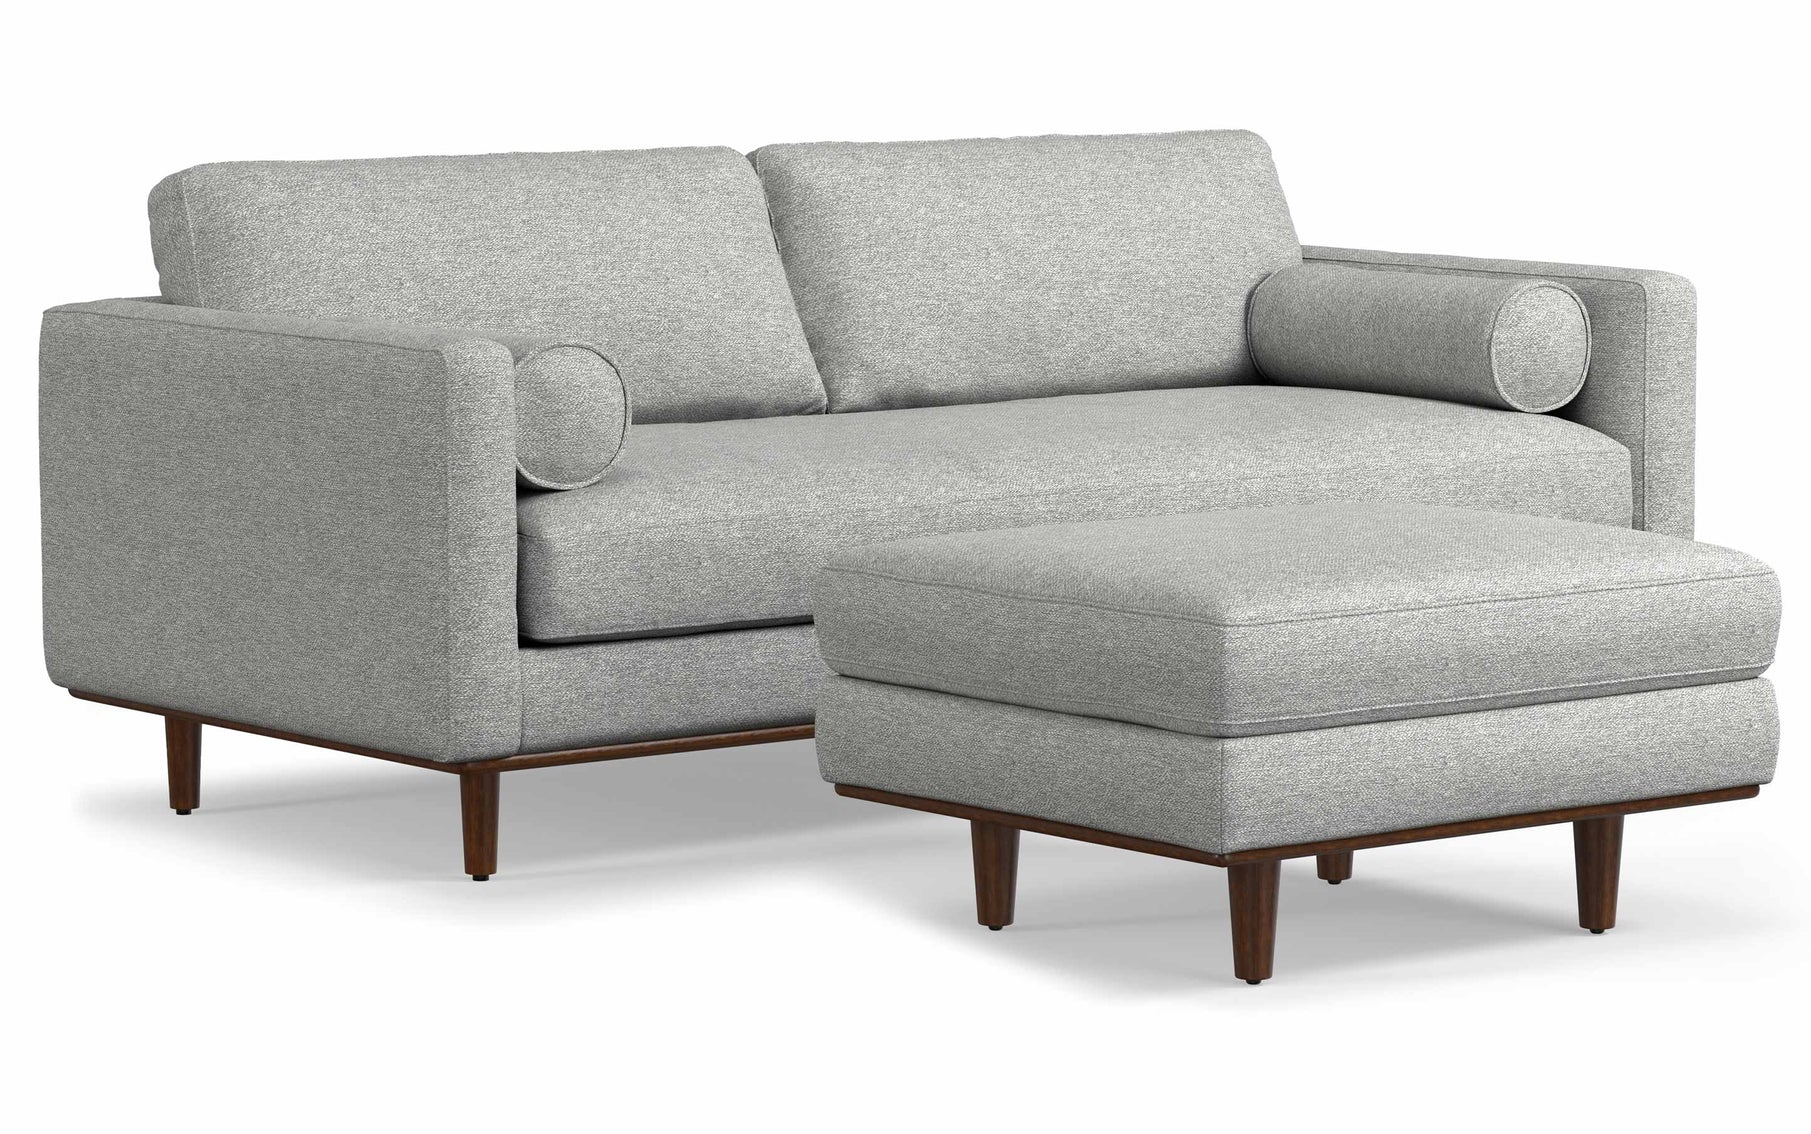 Mist Grey Woven-Blend Fabric | Morrison 89-inch Sofa and Ottoman Set